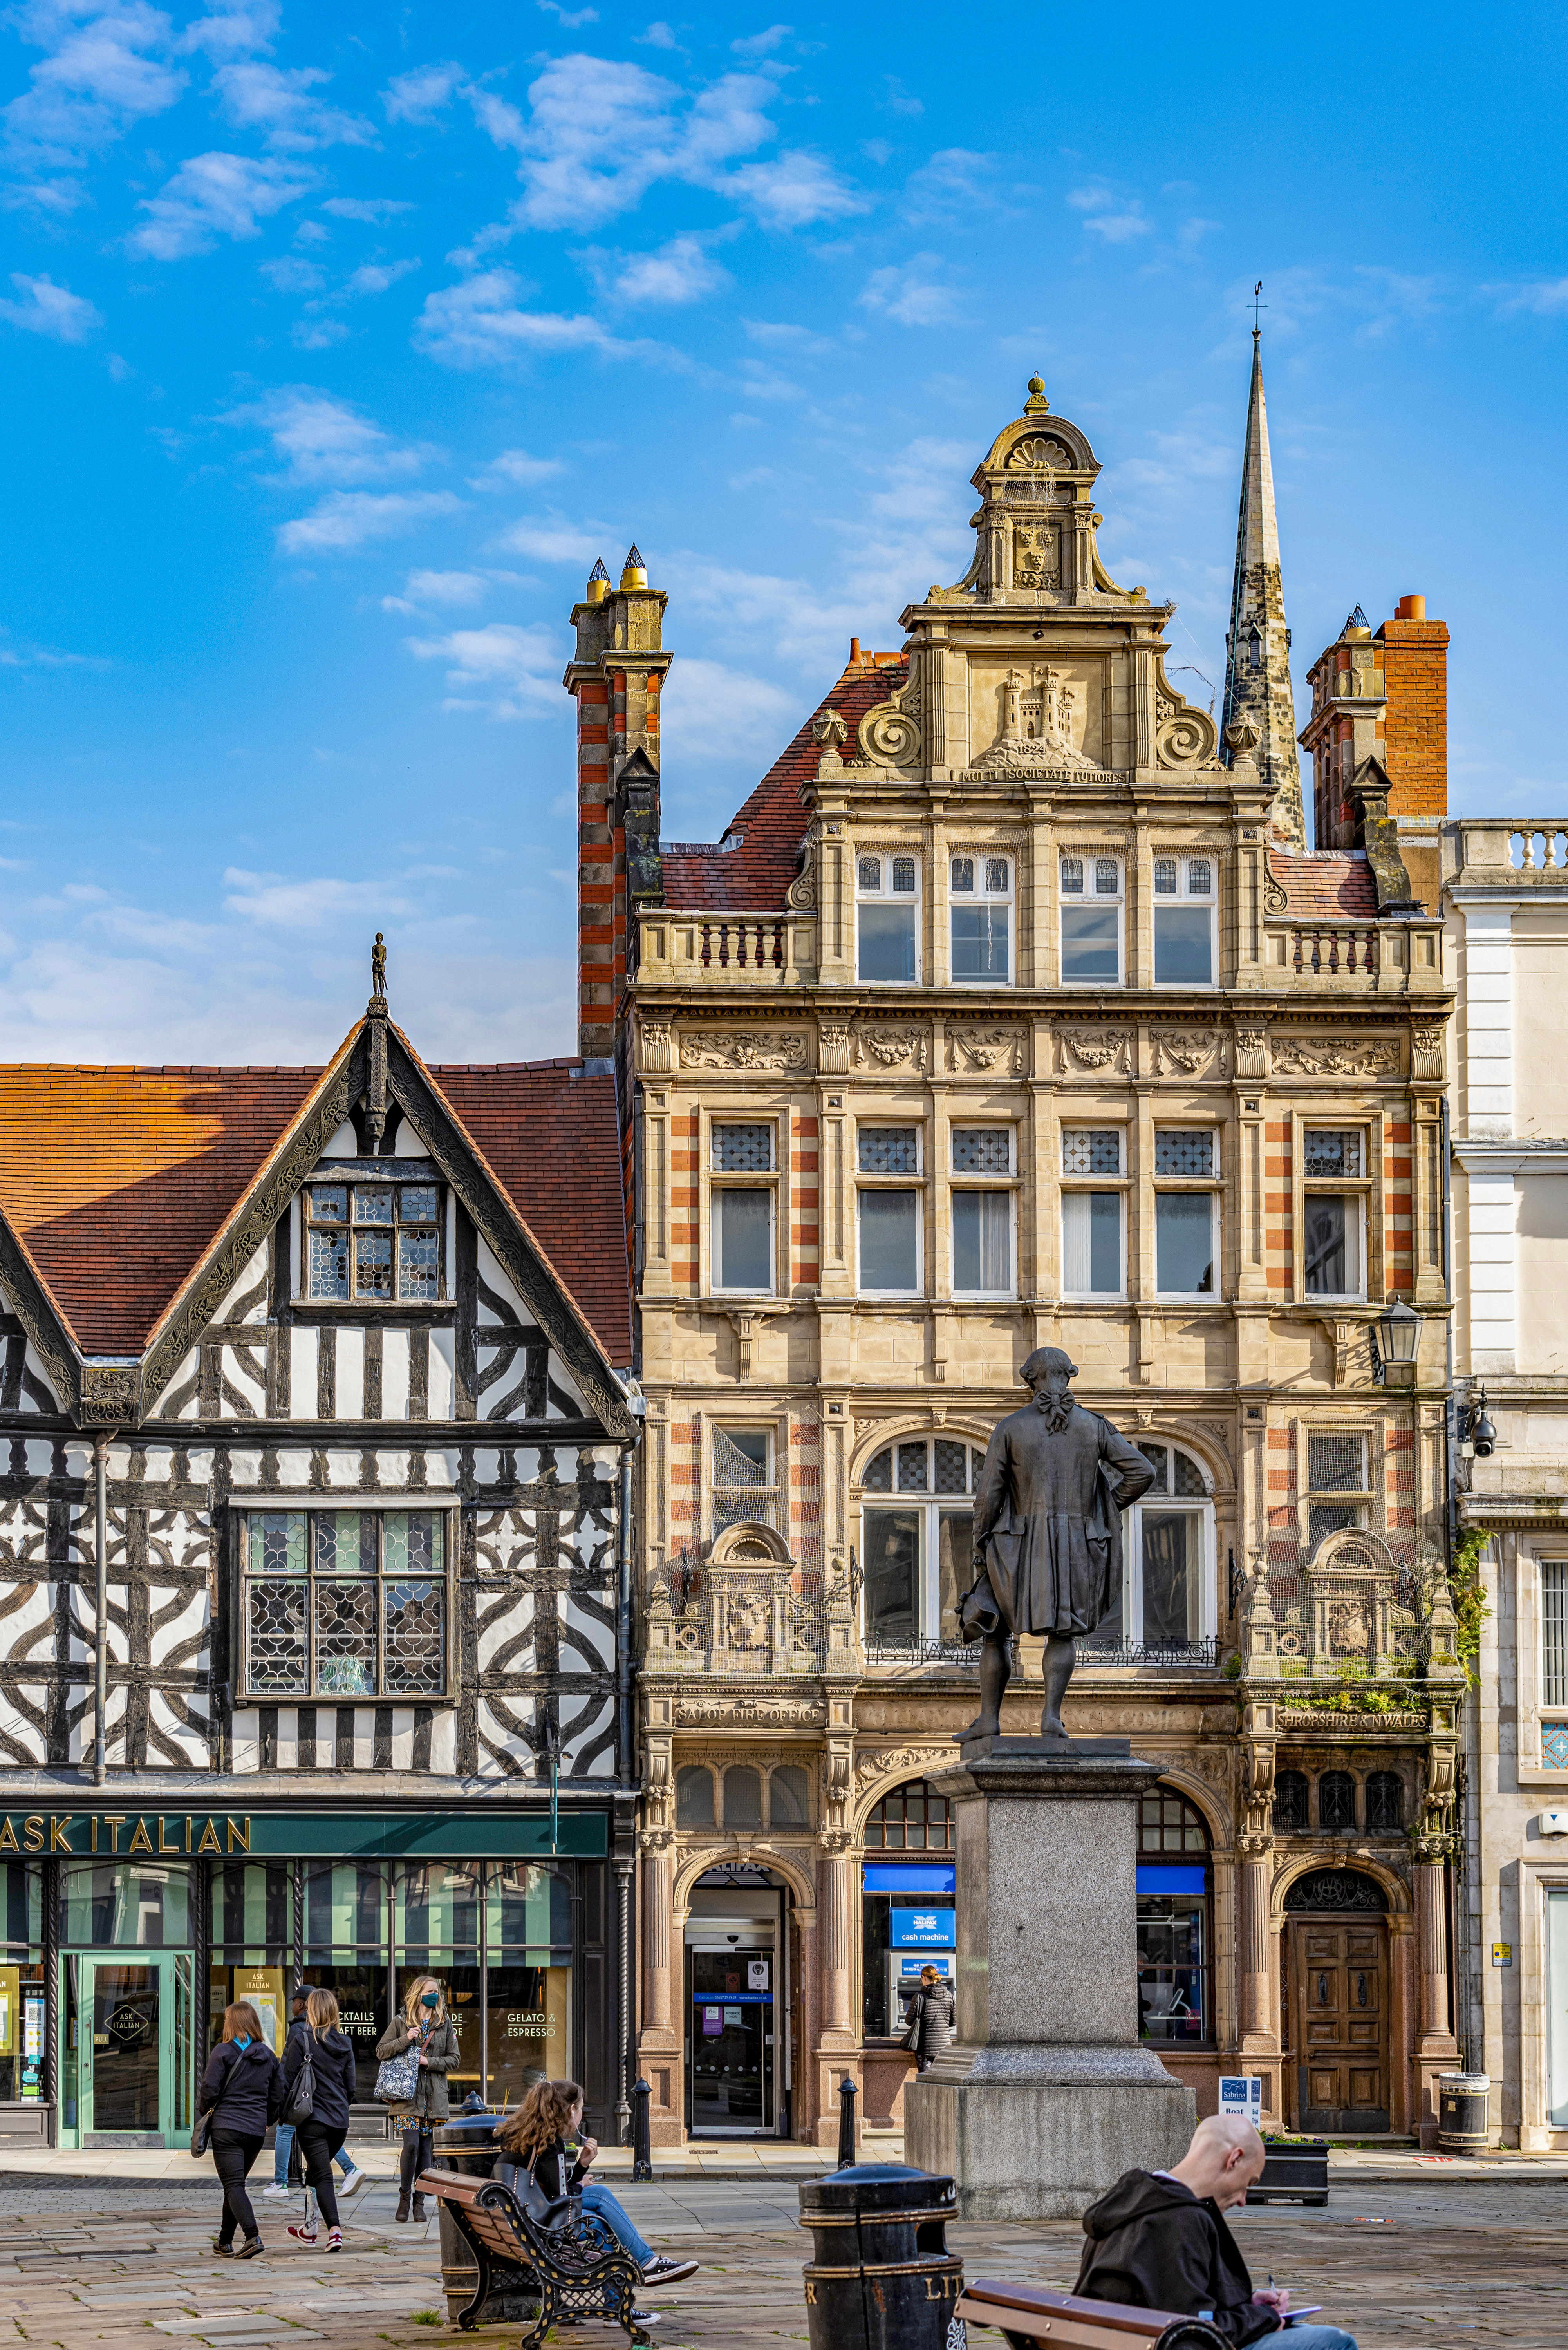 The site is just a short drive from the bustling market town of Shrewsbury